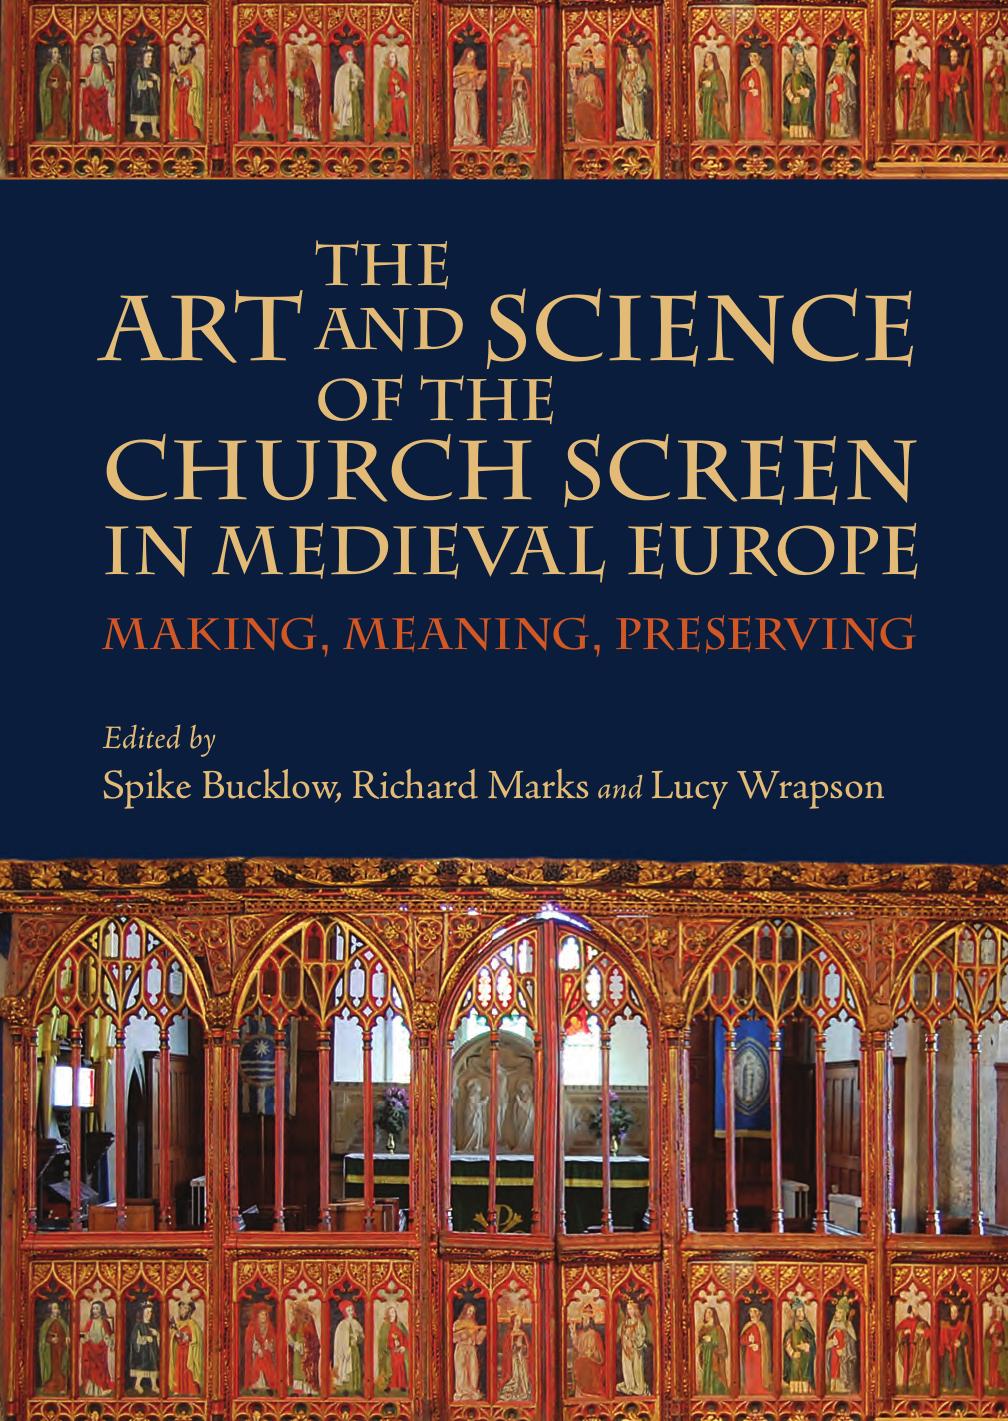 The Art and Science of the Church Screen in Medieval Europe: Making, Meaning, Preserving by Spike Bucklow Richard Marks Lucy Wrapson (eds.)